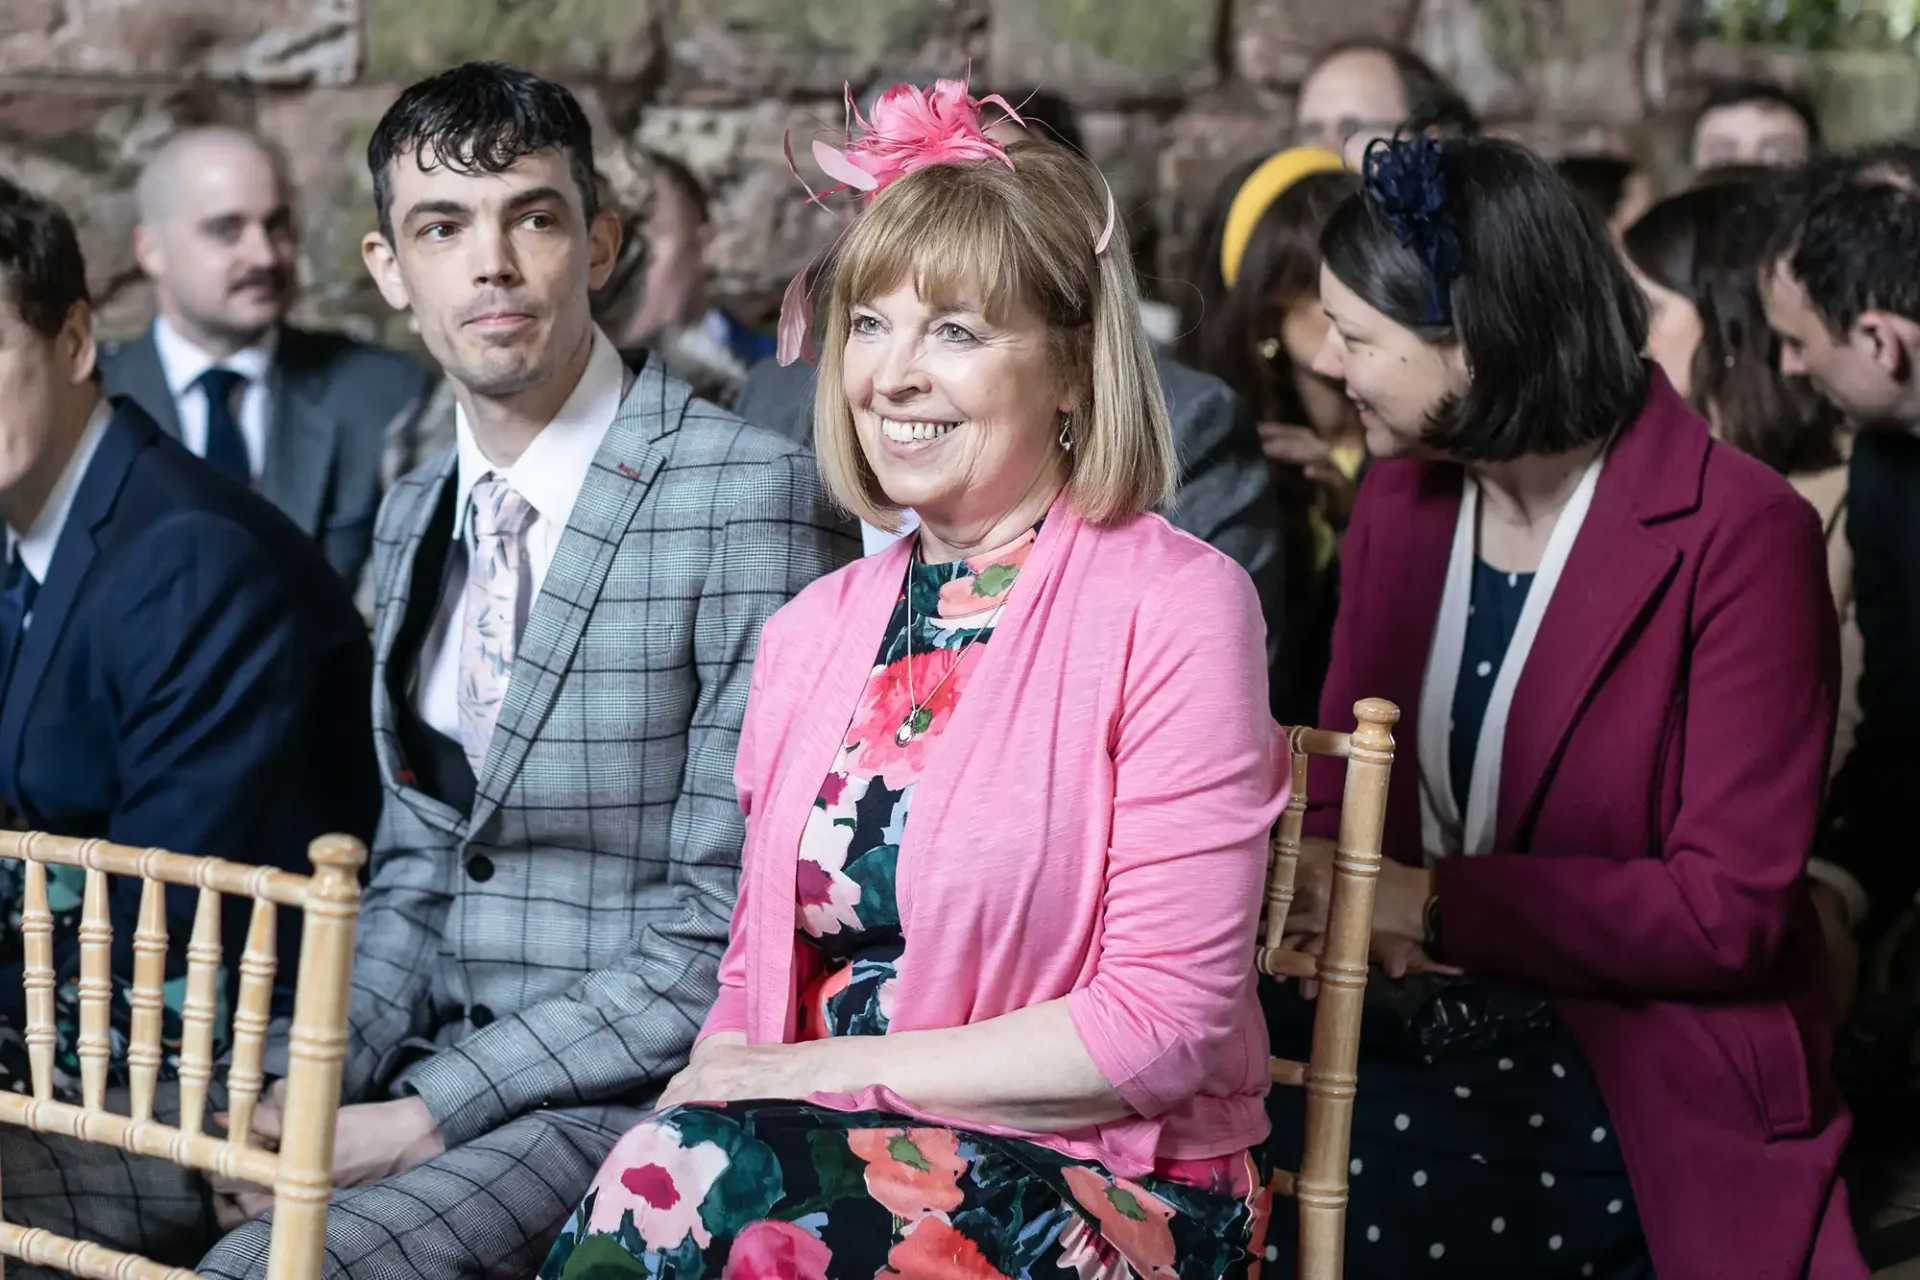 A group of people sitting on wooden chairs at an event. A woman in the foreground wears a floral dress and pink cardigan, with a matching pink fascinator, smiling.